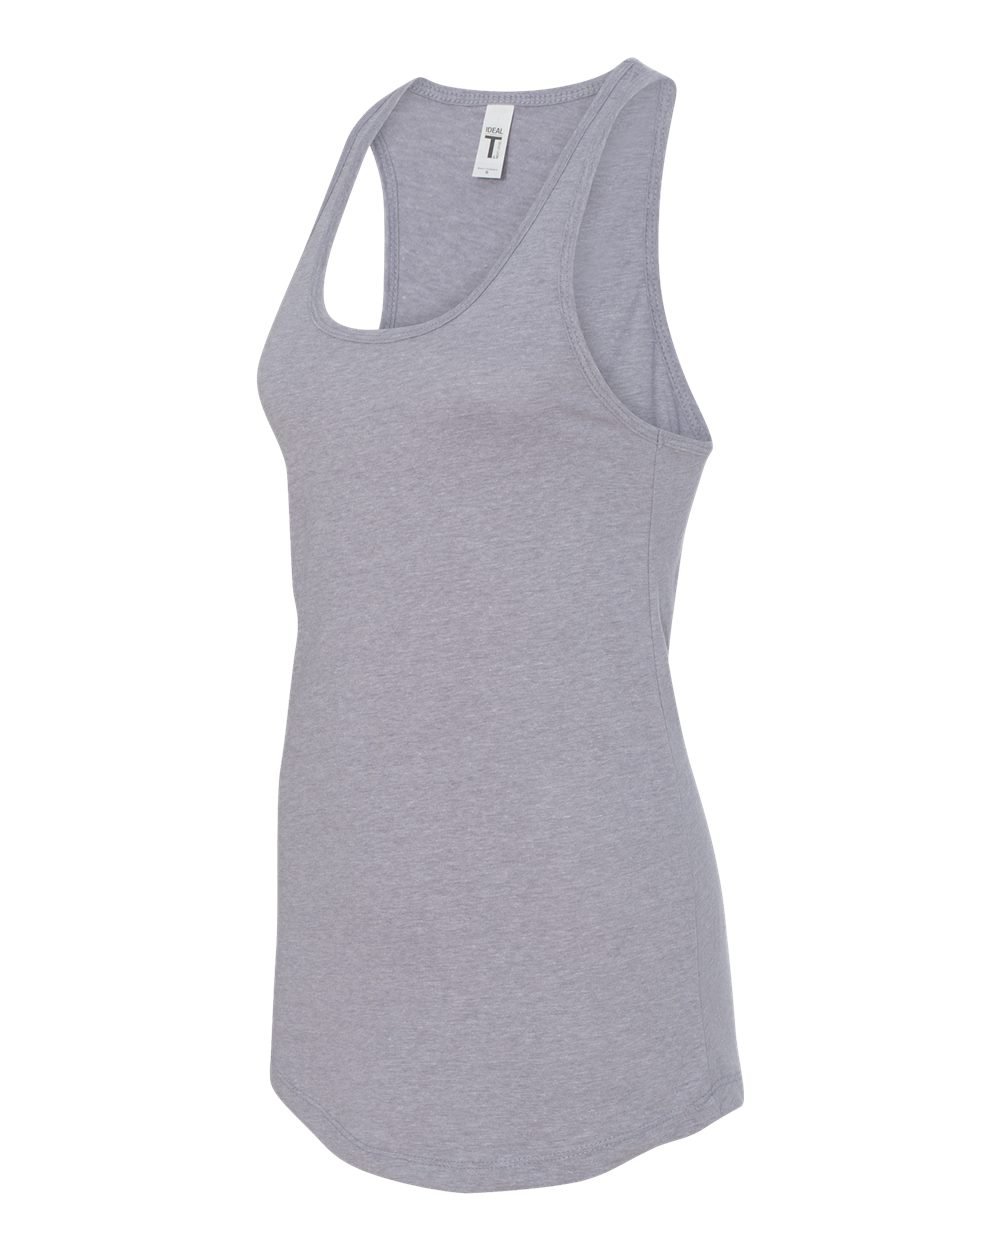 Next Level Ideal Racerback Tank Heather Gray Small (Pack of 5)